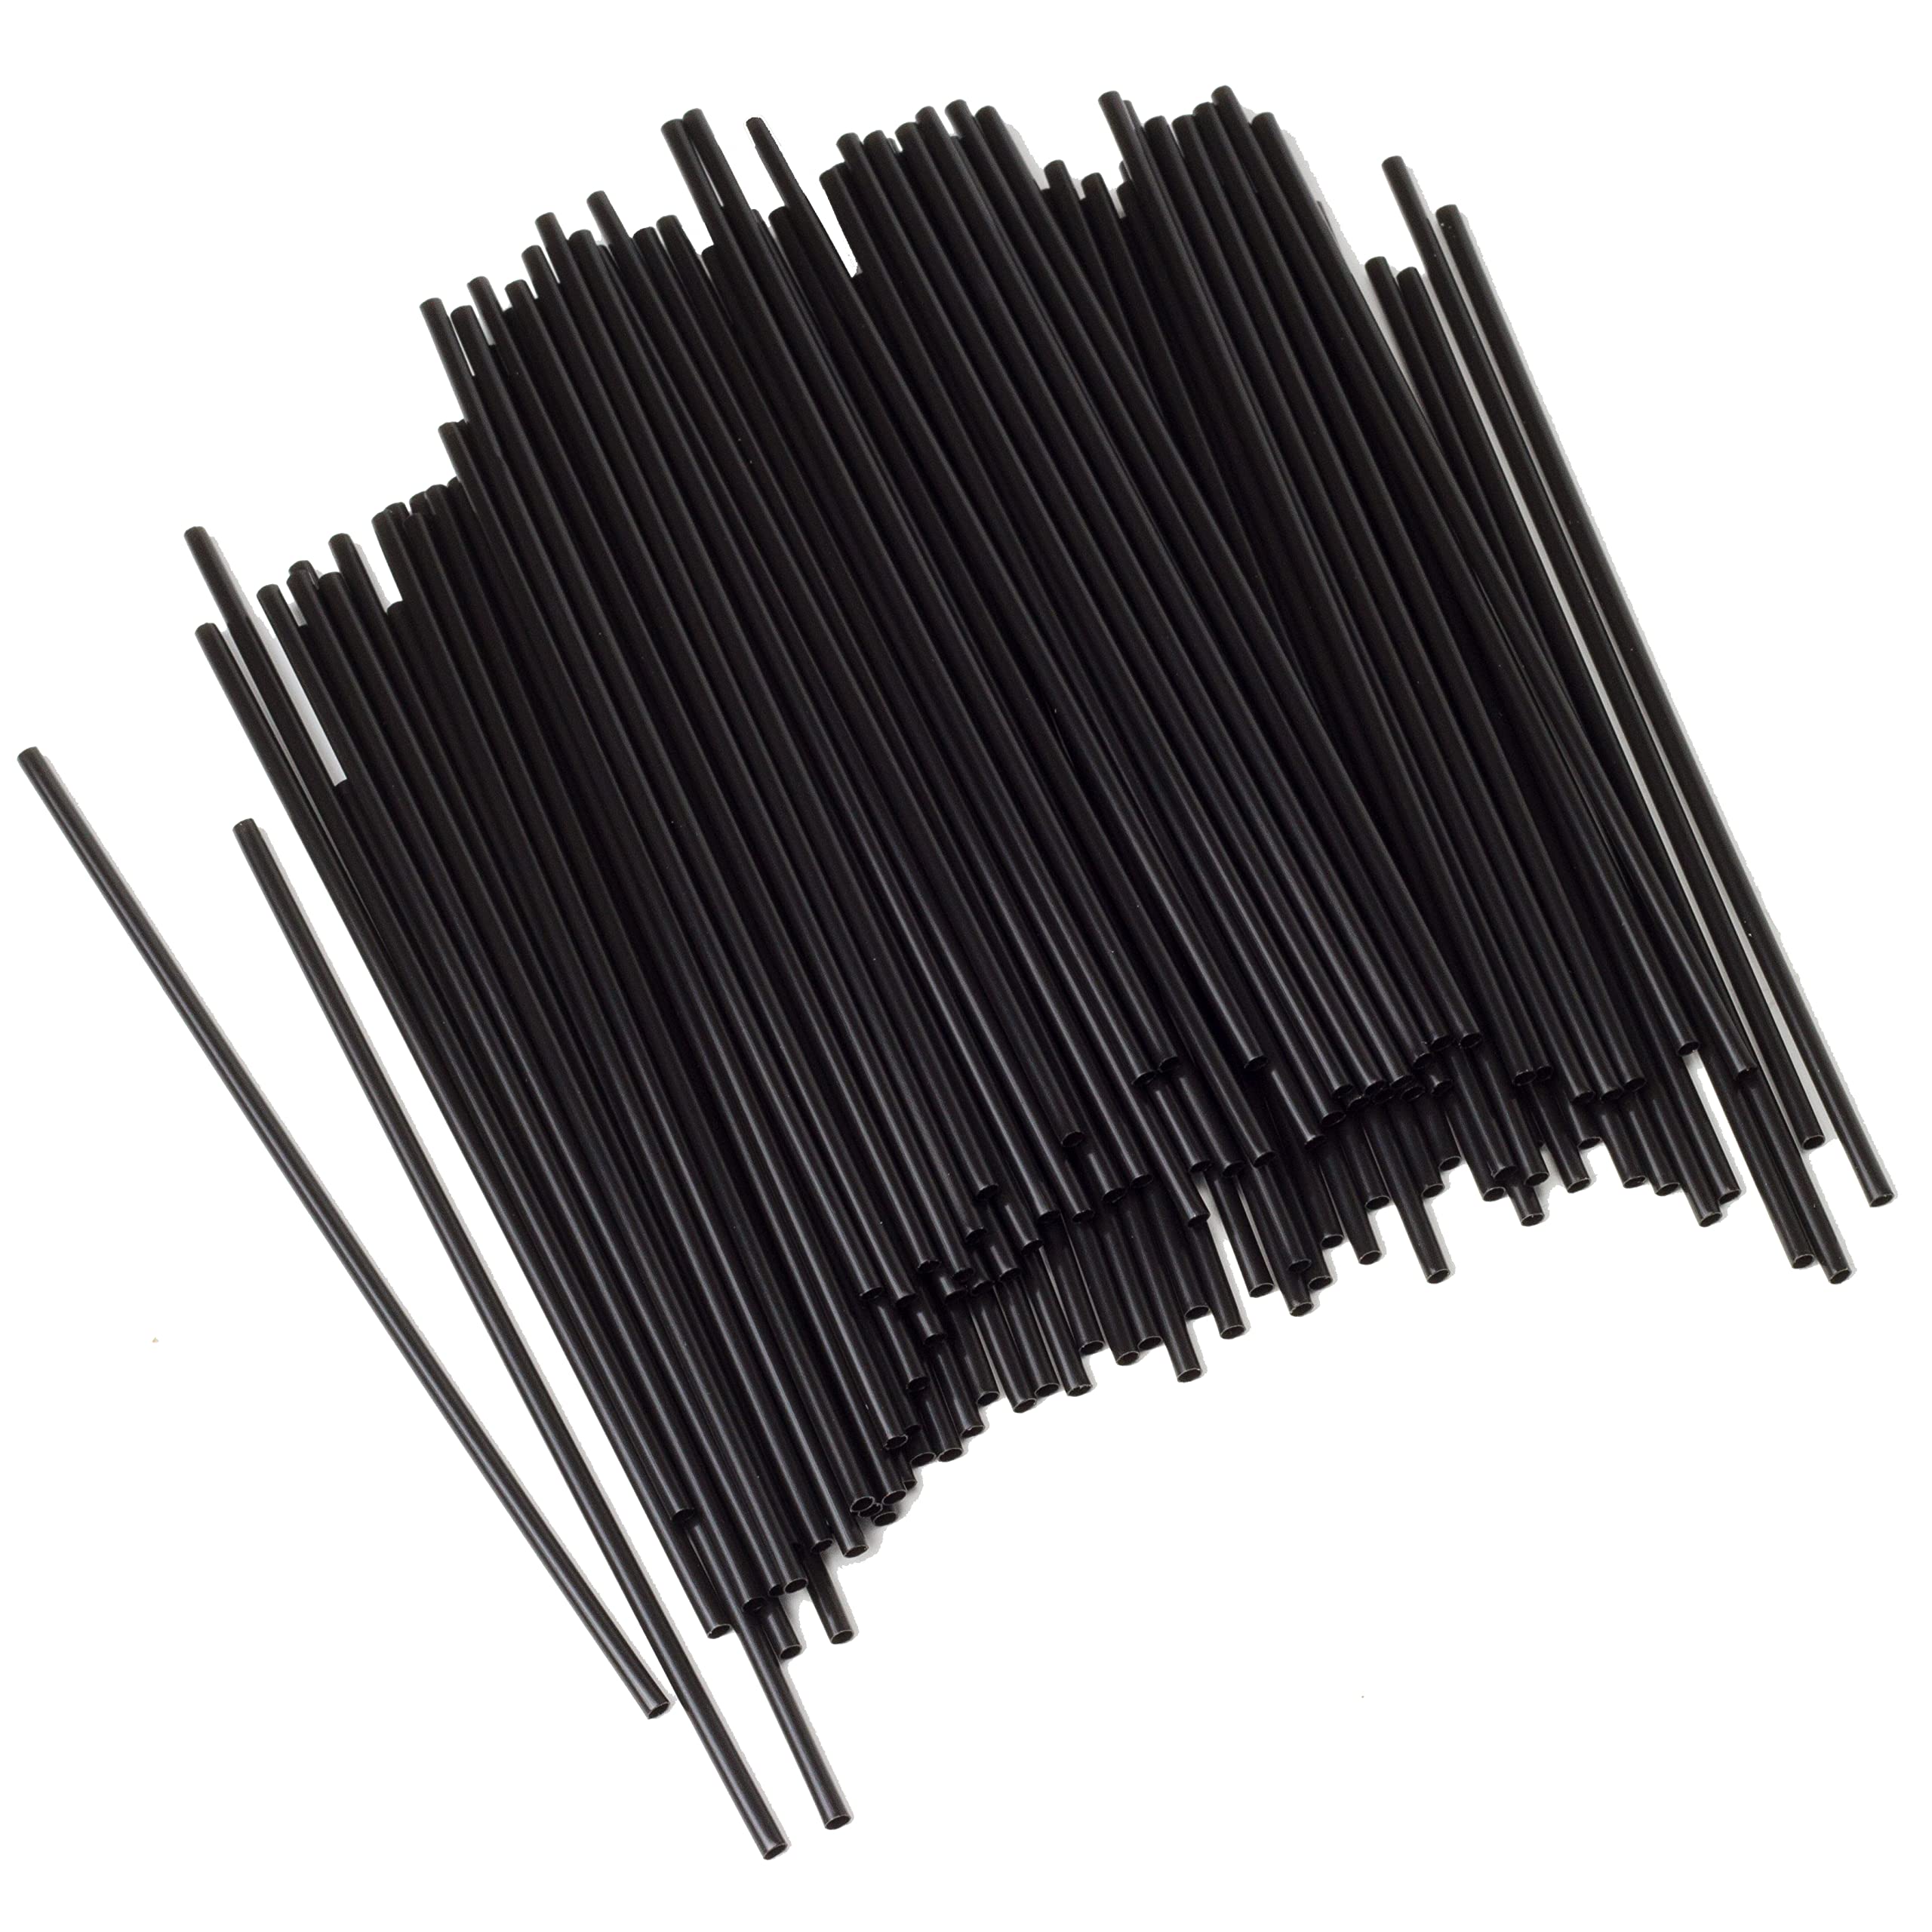 Chef Craft Select Plastic Cocktail or Coffee Stirrer Straws, 5 inch 150 piece set - $1.59